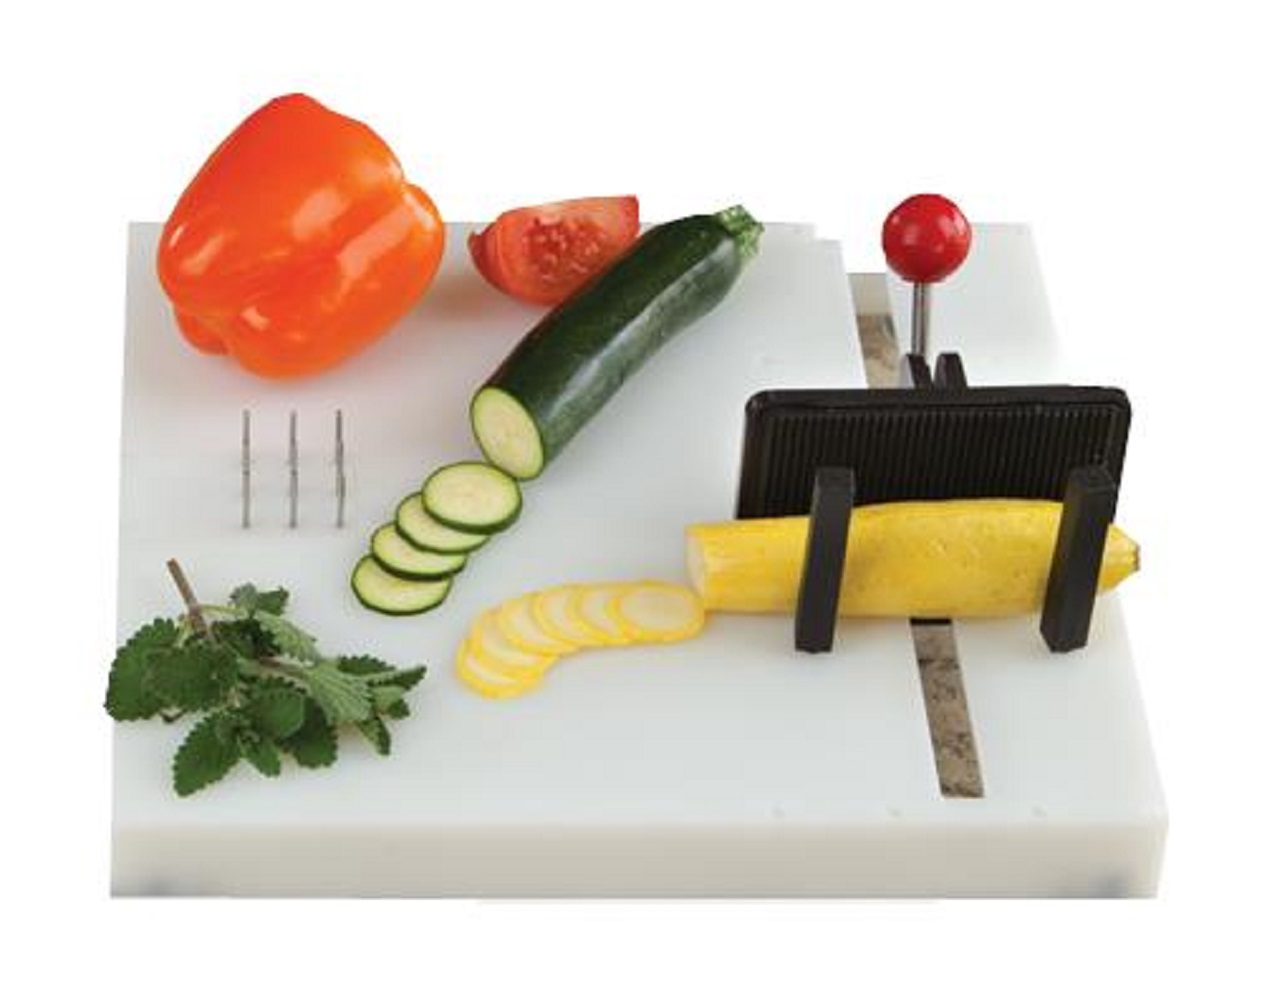 ETAC Deluxe One-Handed Food Prep Paring and Cutting Board, 12x11 inch - image 2 of 4